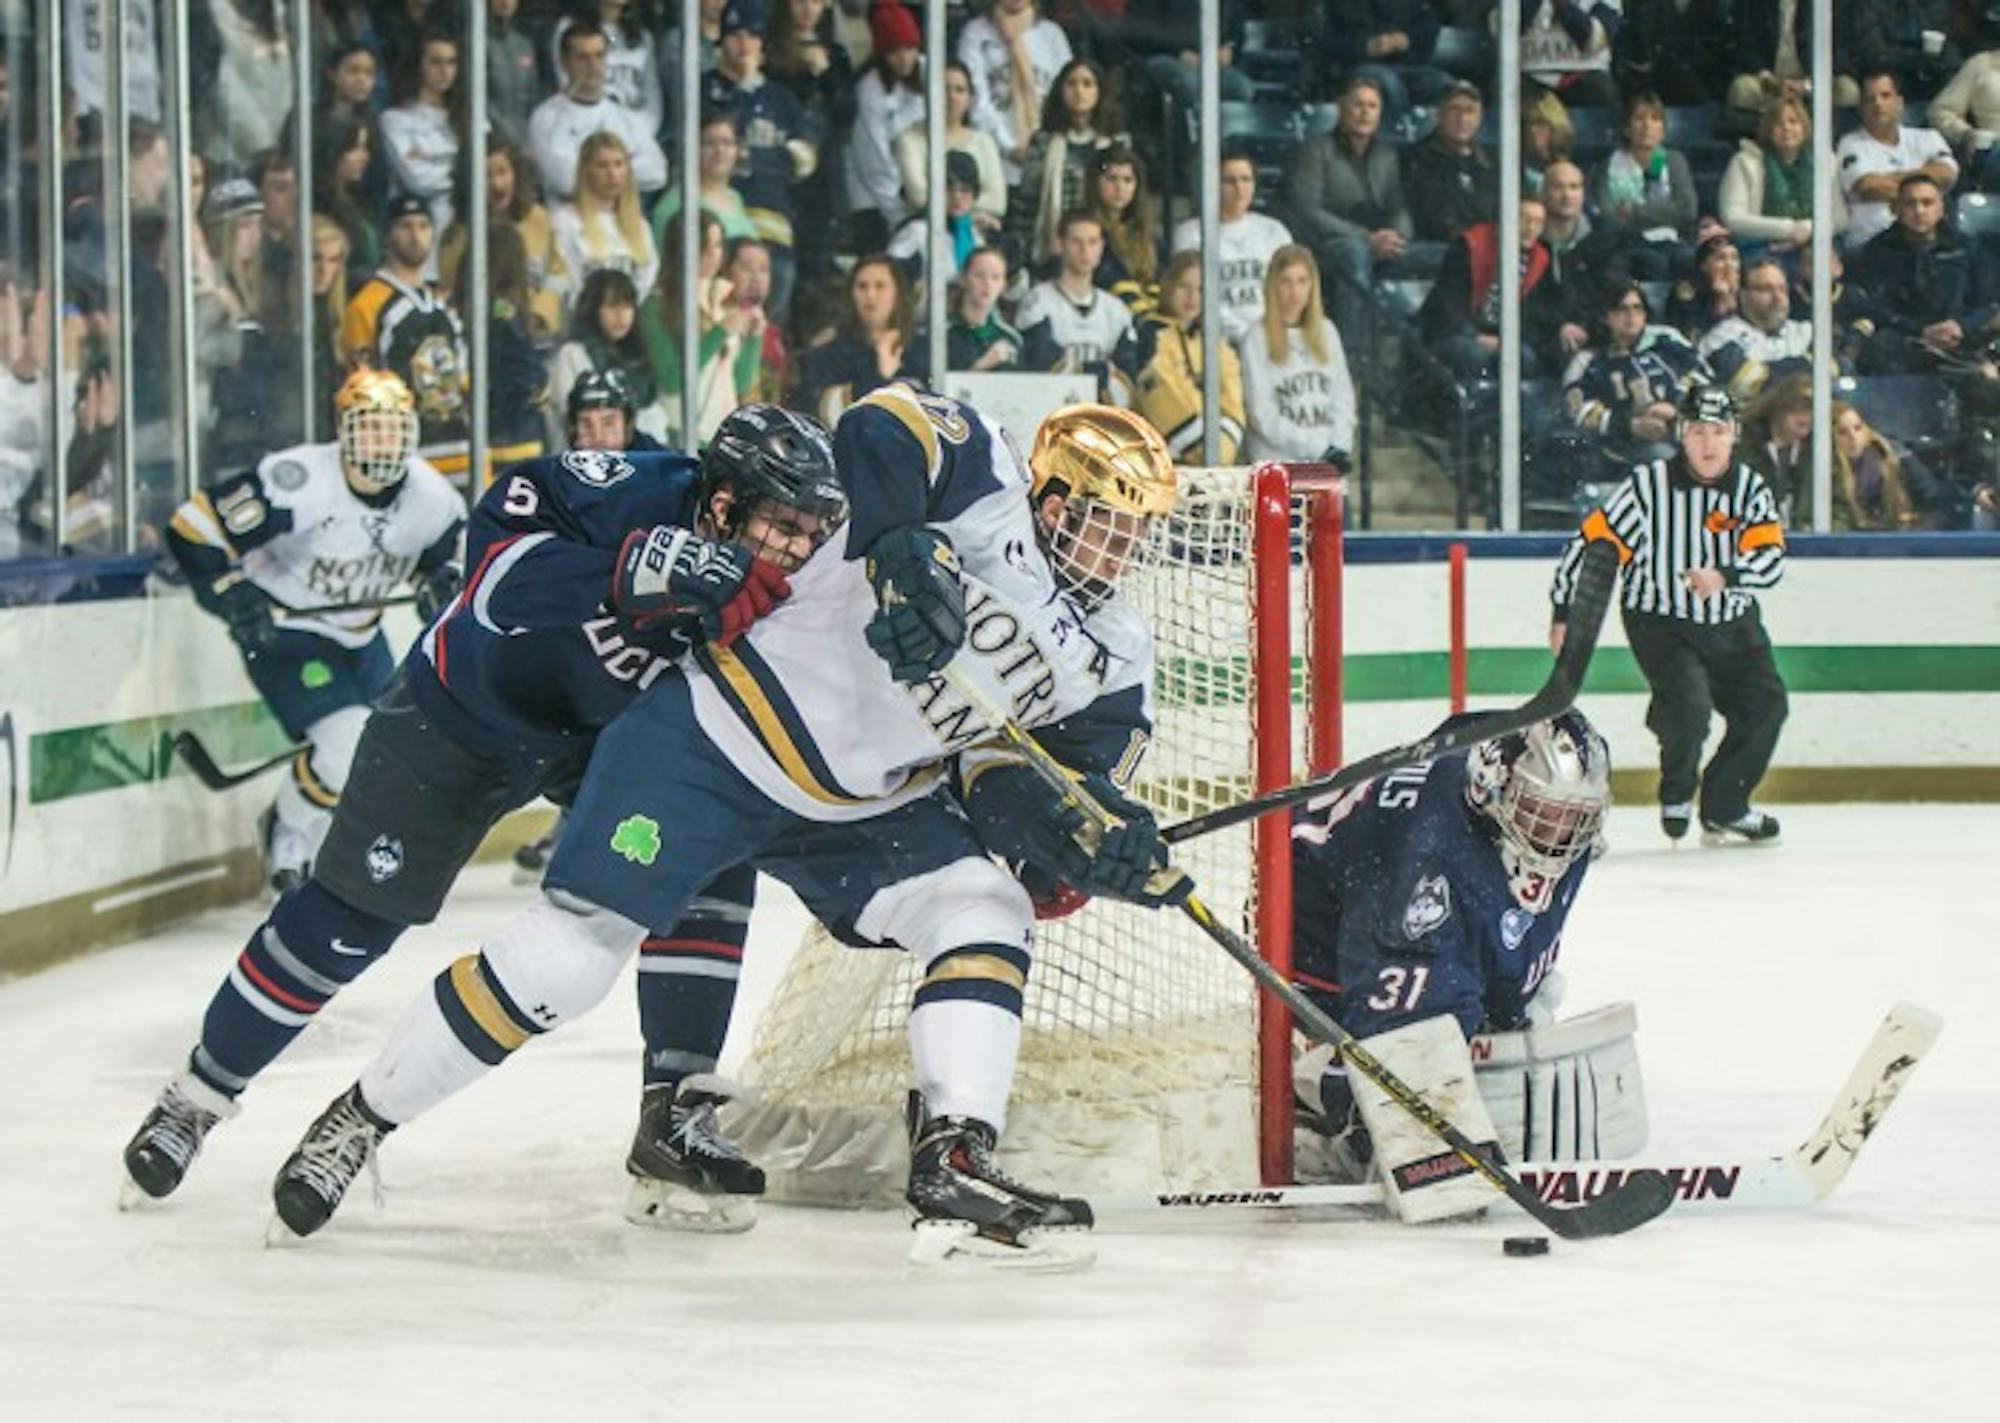 Irish junior left winger Sam Herr attempts to wrap a shot around the net during Notre Dame’s 3-3 tie against Connecticut on Jan. 16.